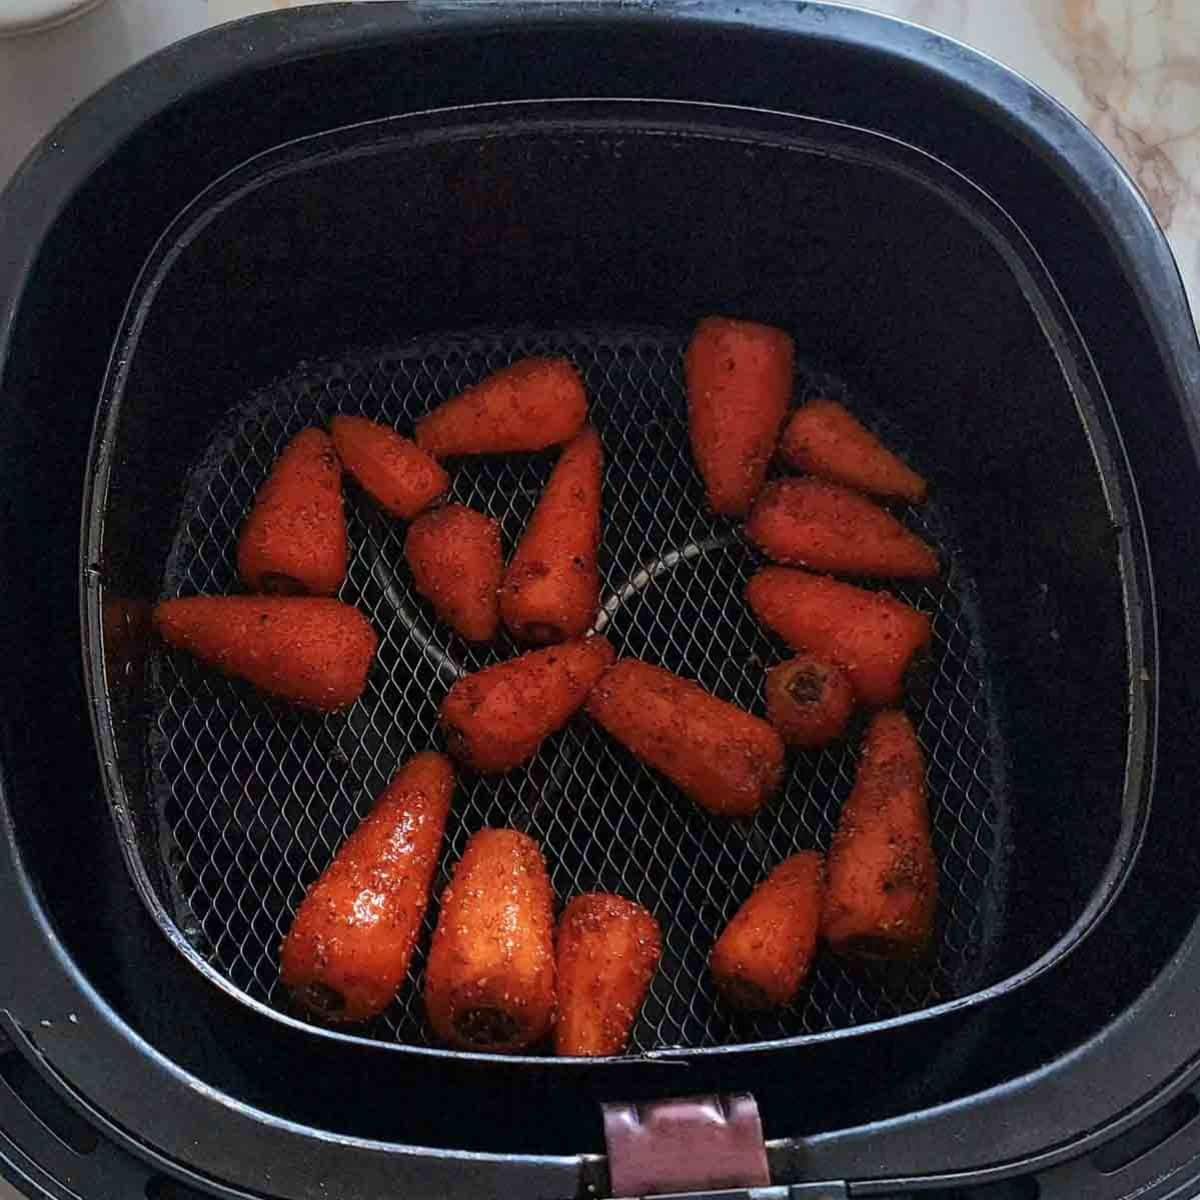 place evenly in air fryer basket